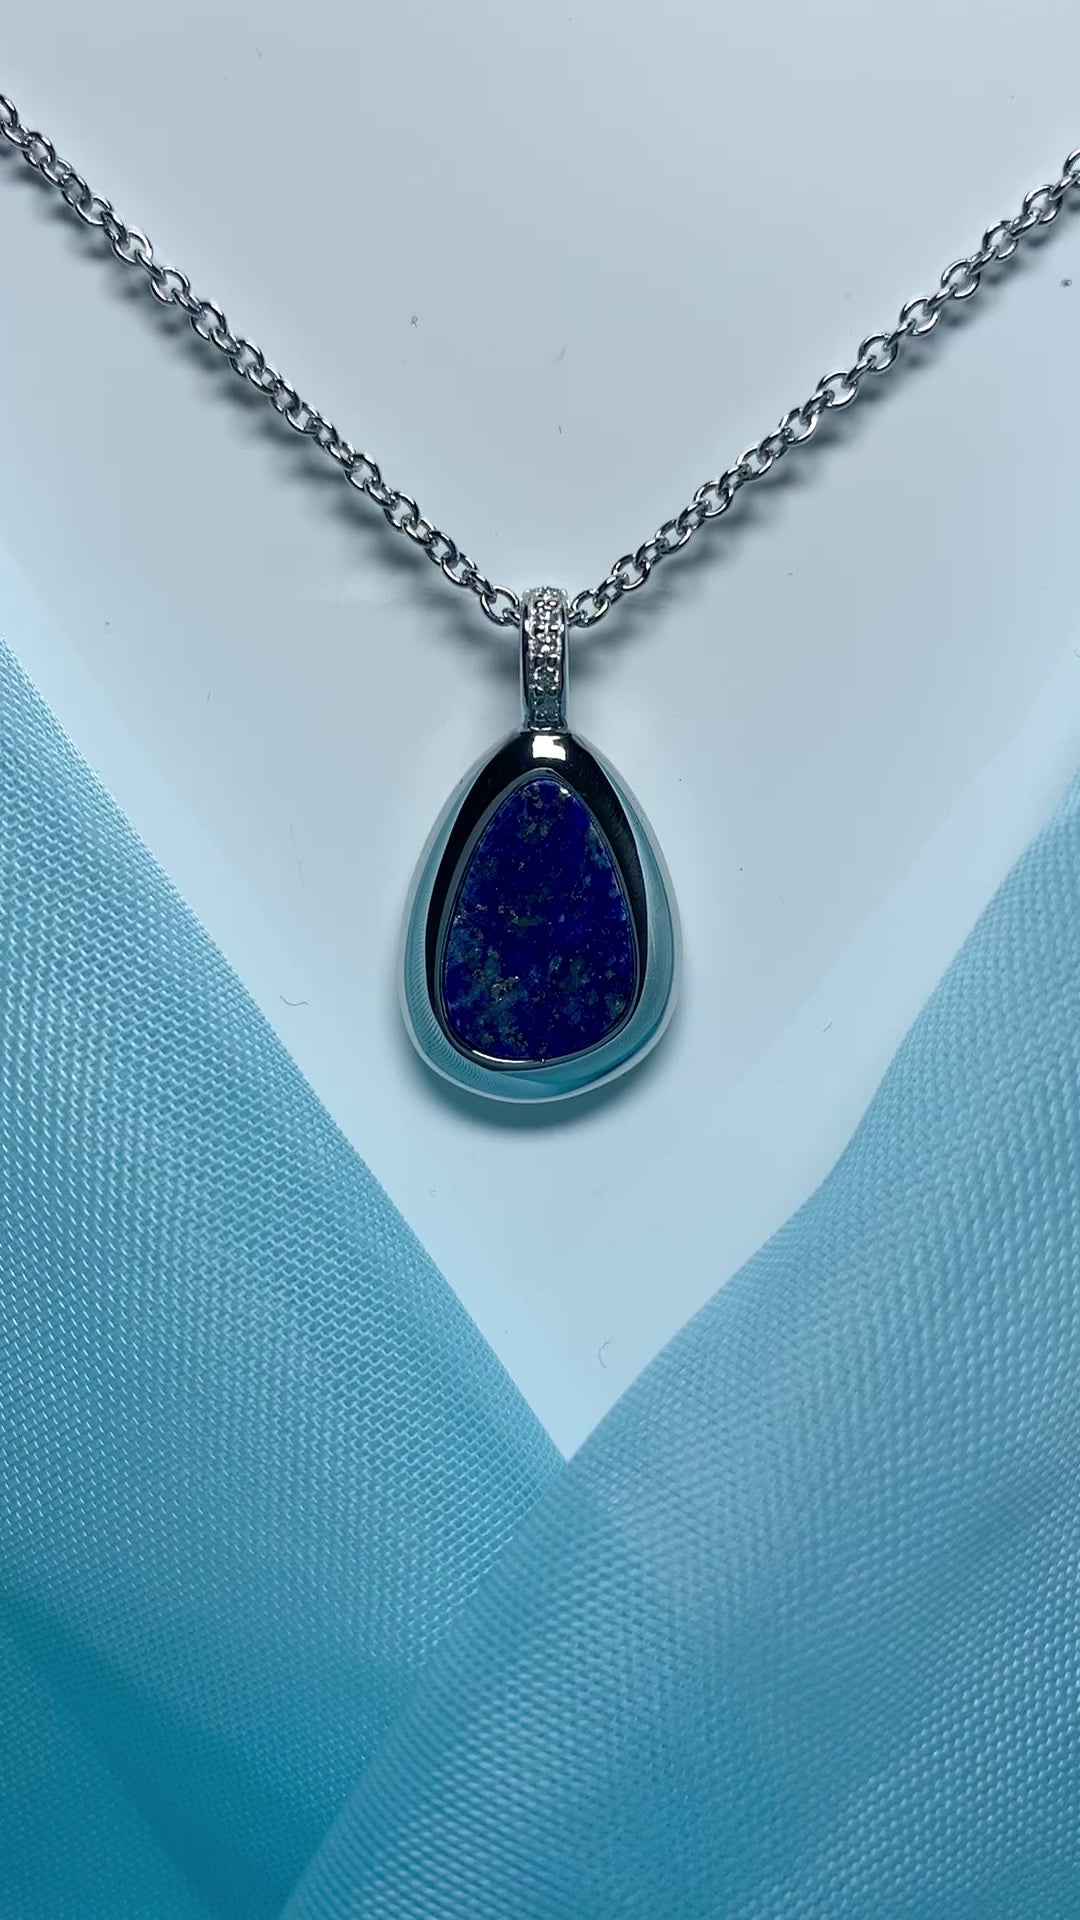 Secondhand 18ct Lapis Lazuli Tiffany & Co. Necklet at Segal's Jewellers